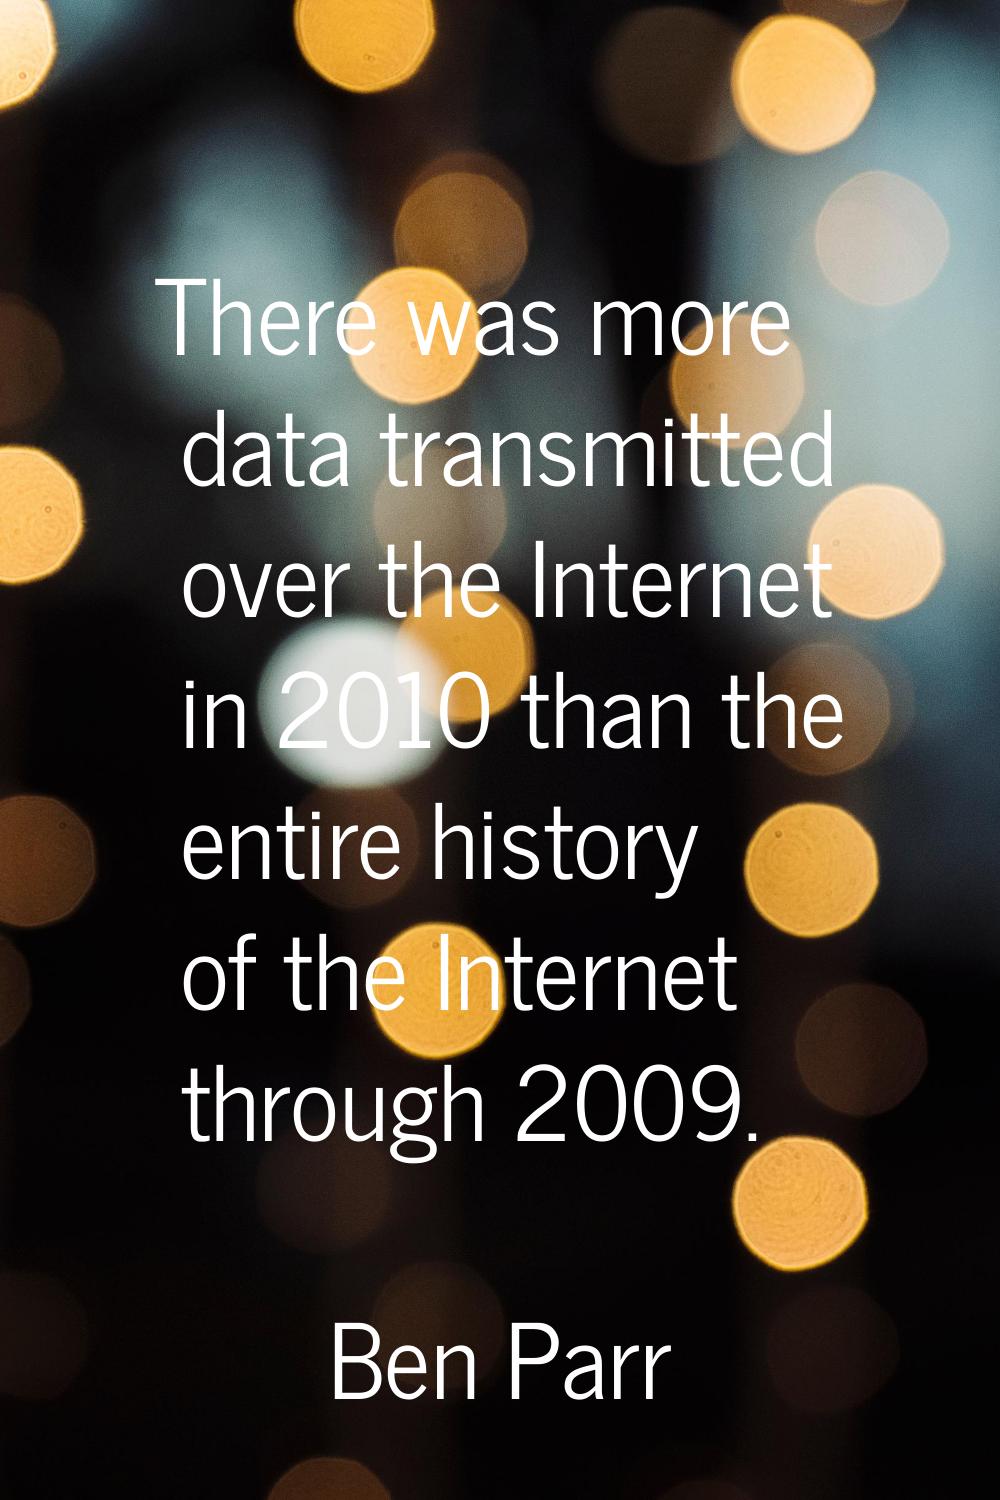 There was more data transmitted over the Internet in 2010 than the entire history of the Internet t